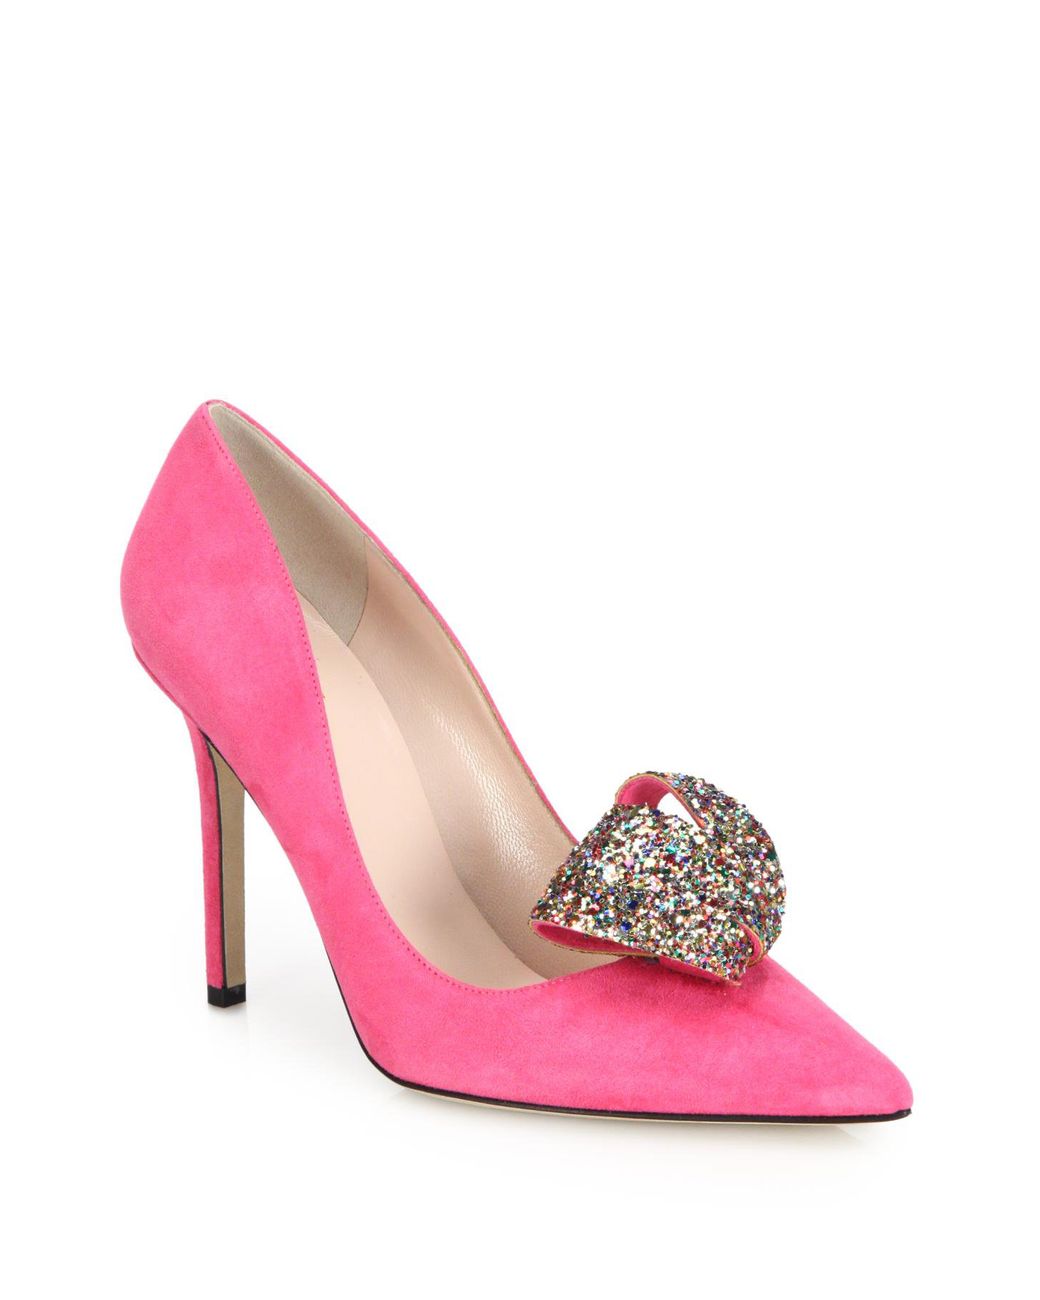 Kate Spade Louisa Glitter Bow Suede Pumps in Pink | Lyst